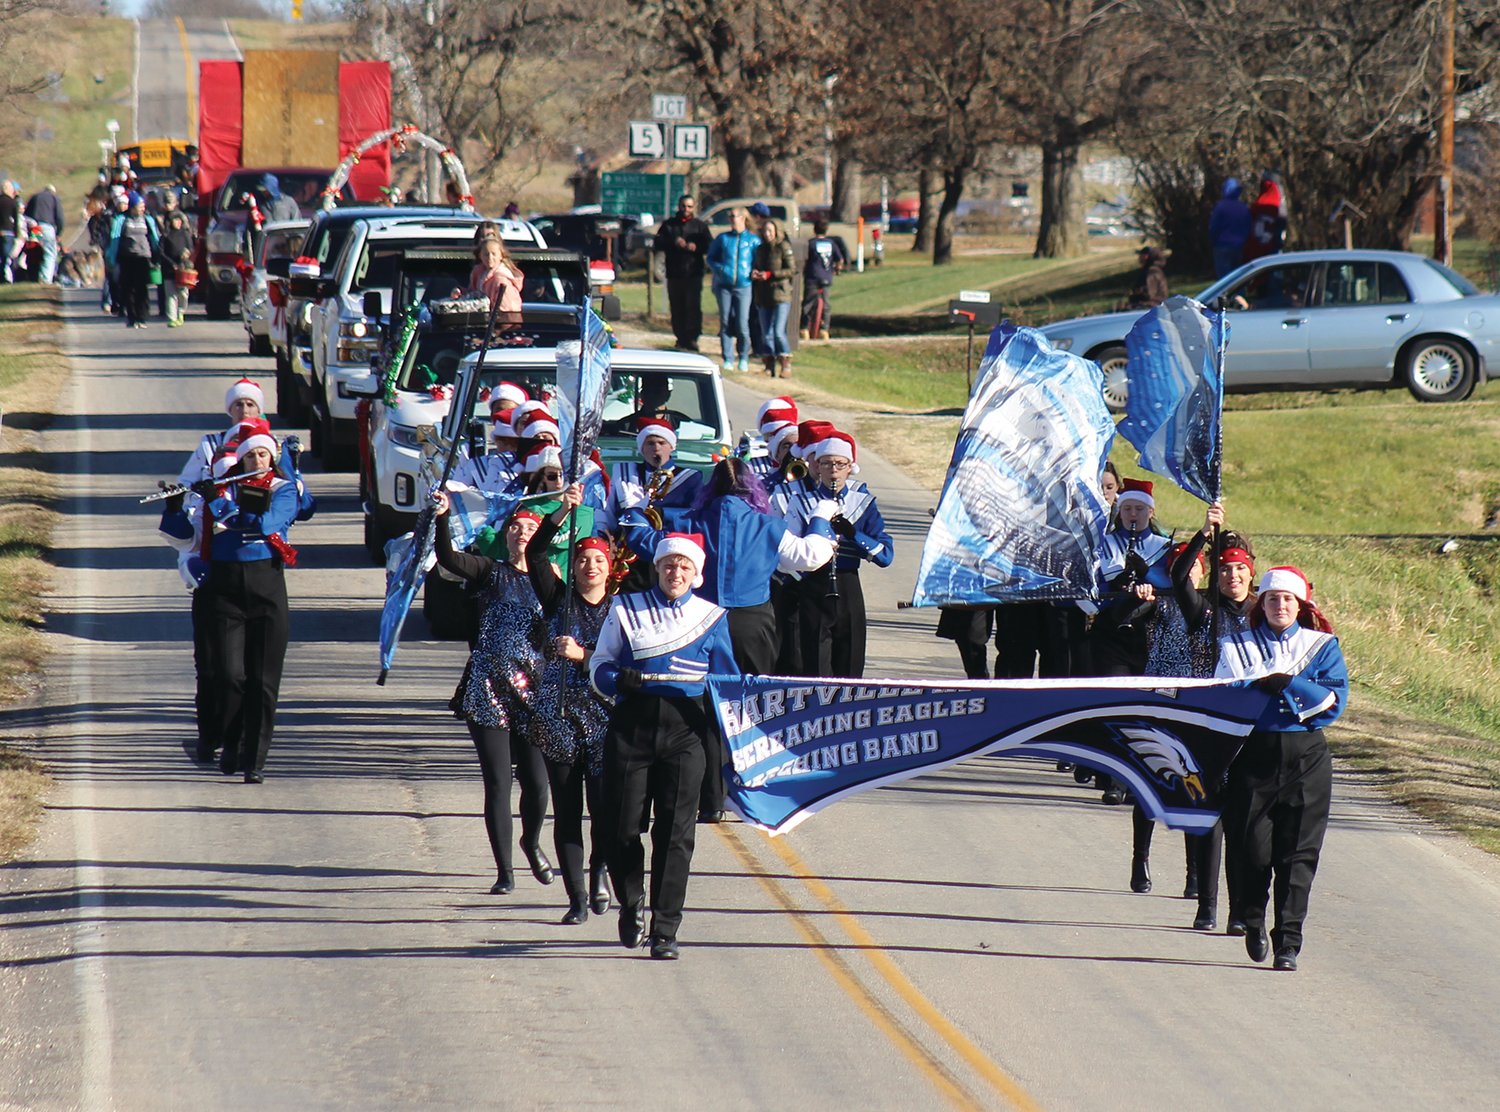 Several Grovespring Christmas Parade participants during the parade held on Saturday, Dec. 11.